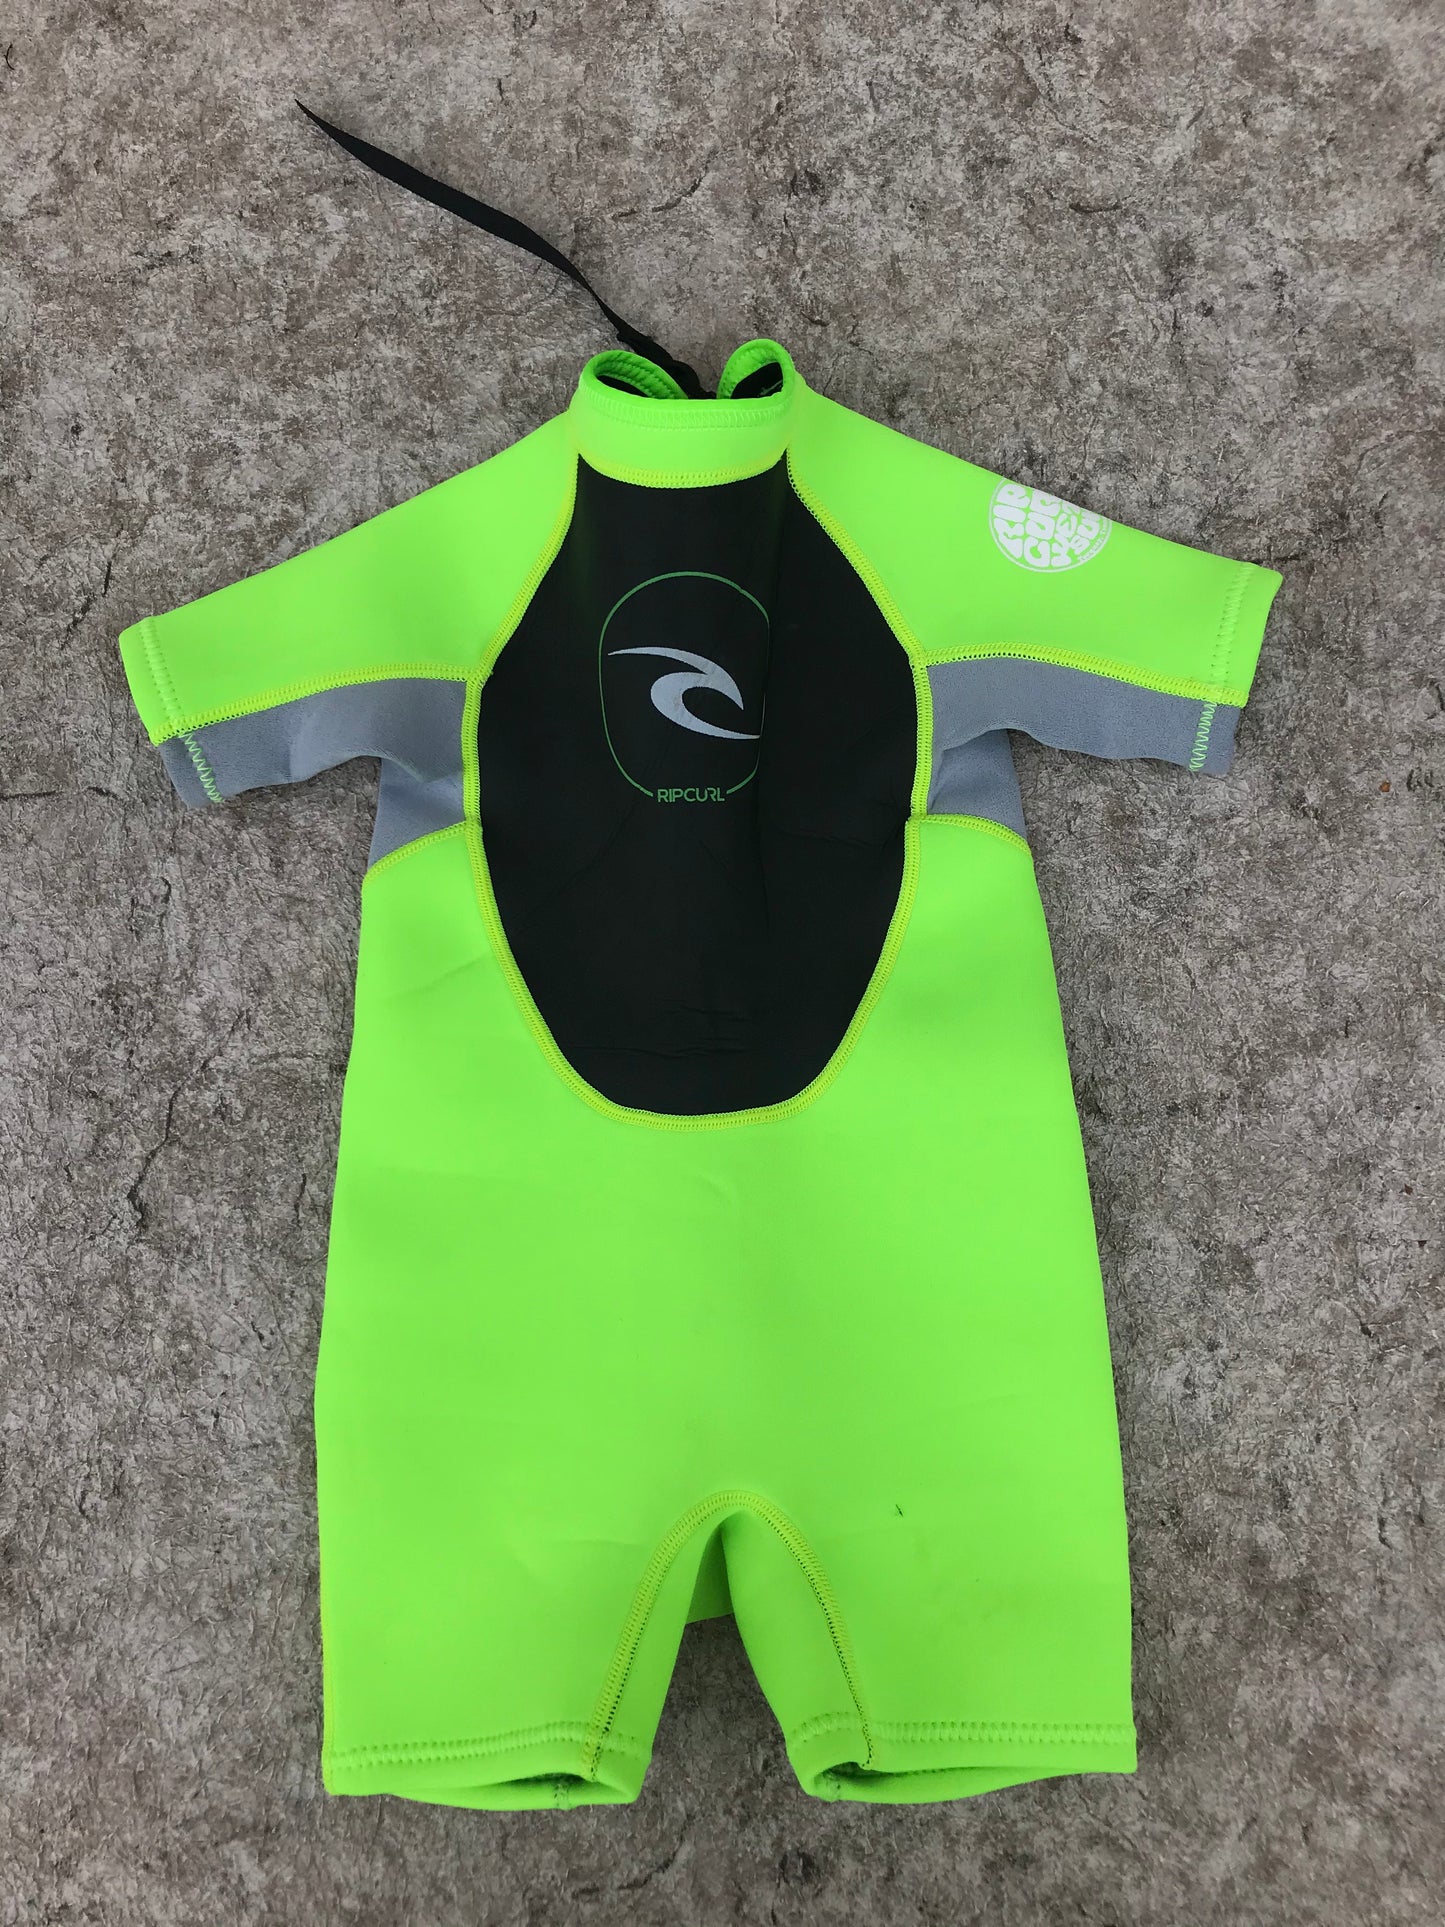 Wetsuit Child Size 2 Ripcurl Black Lime 2-3 mm Neoprene Excellent